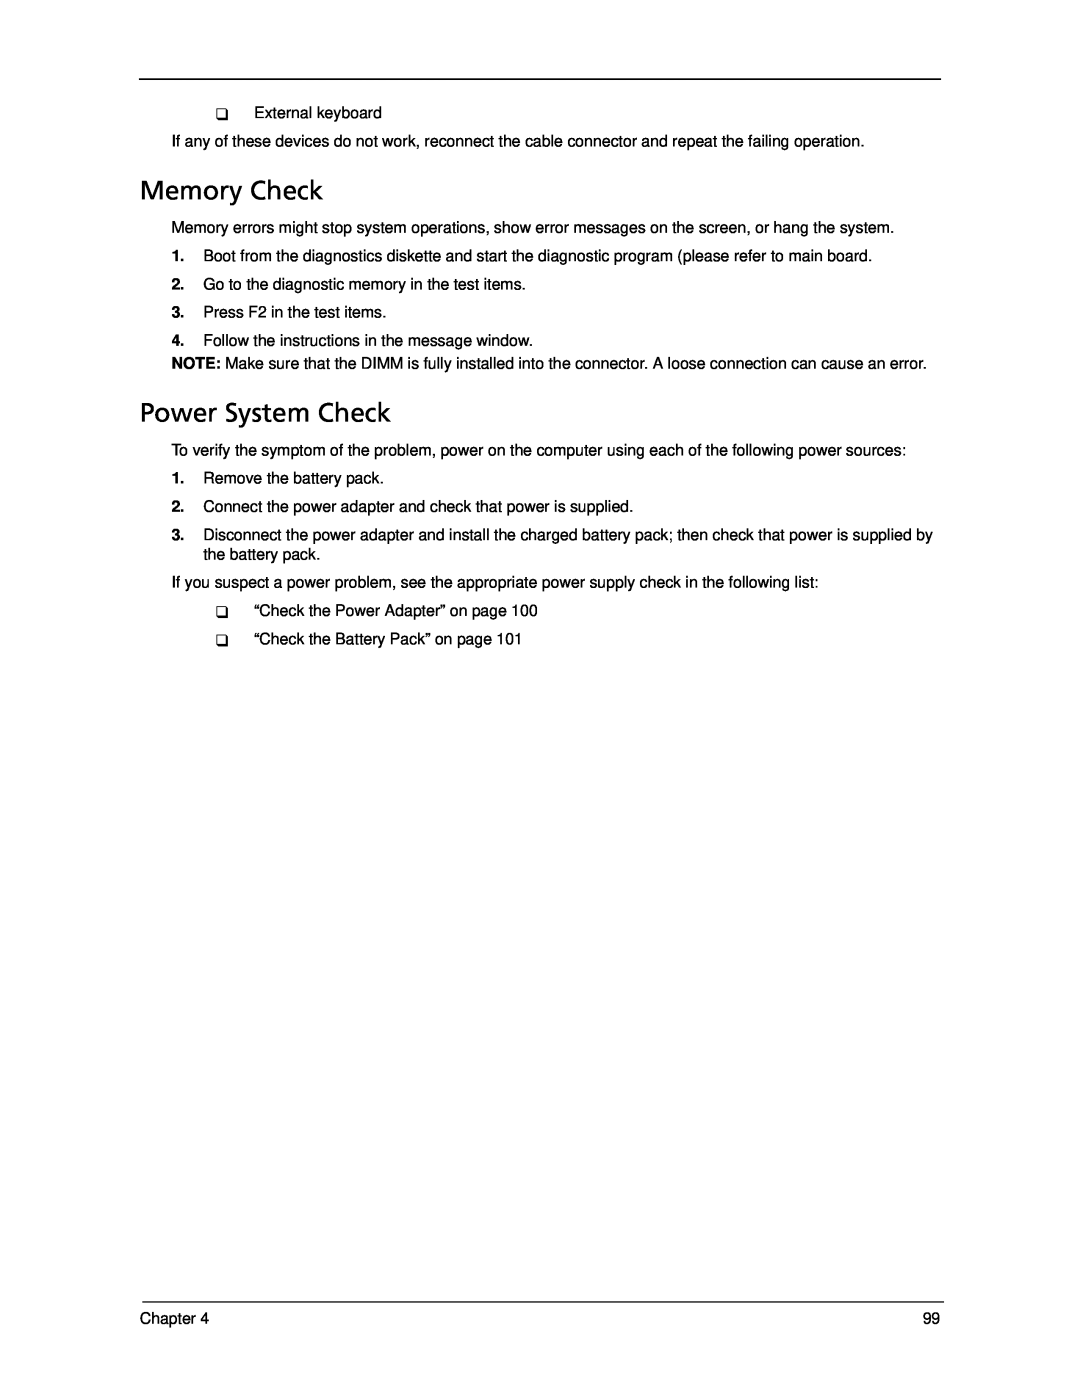 Acer 5330 manual Memory Check, Power System Check 